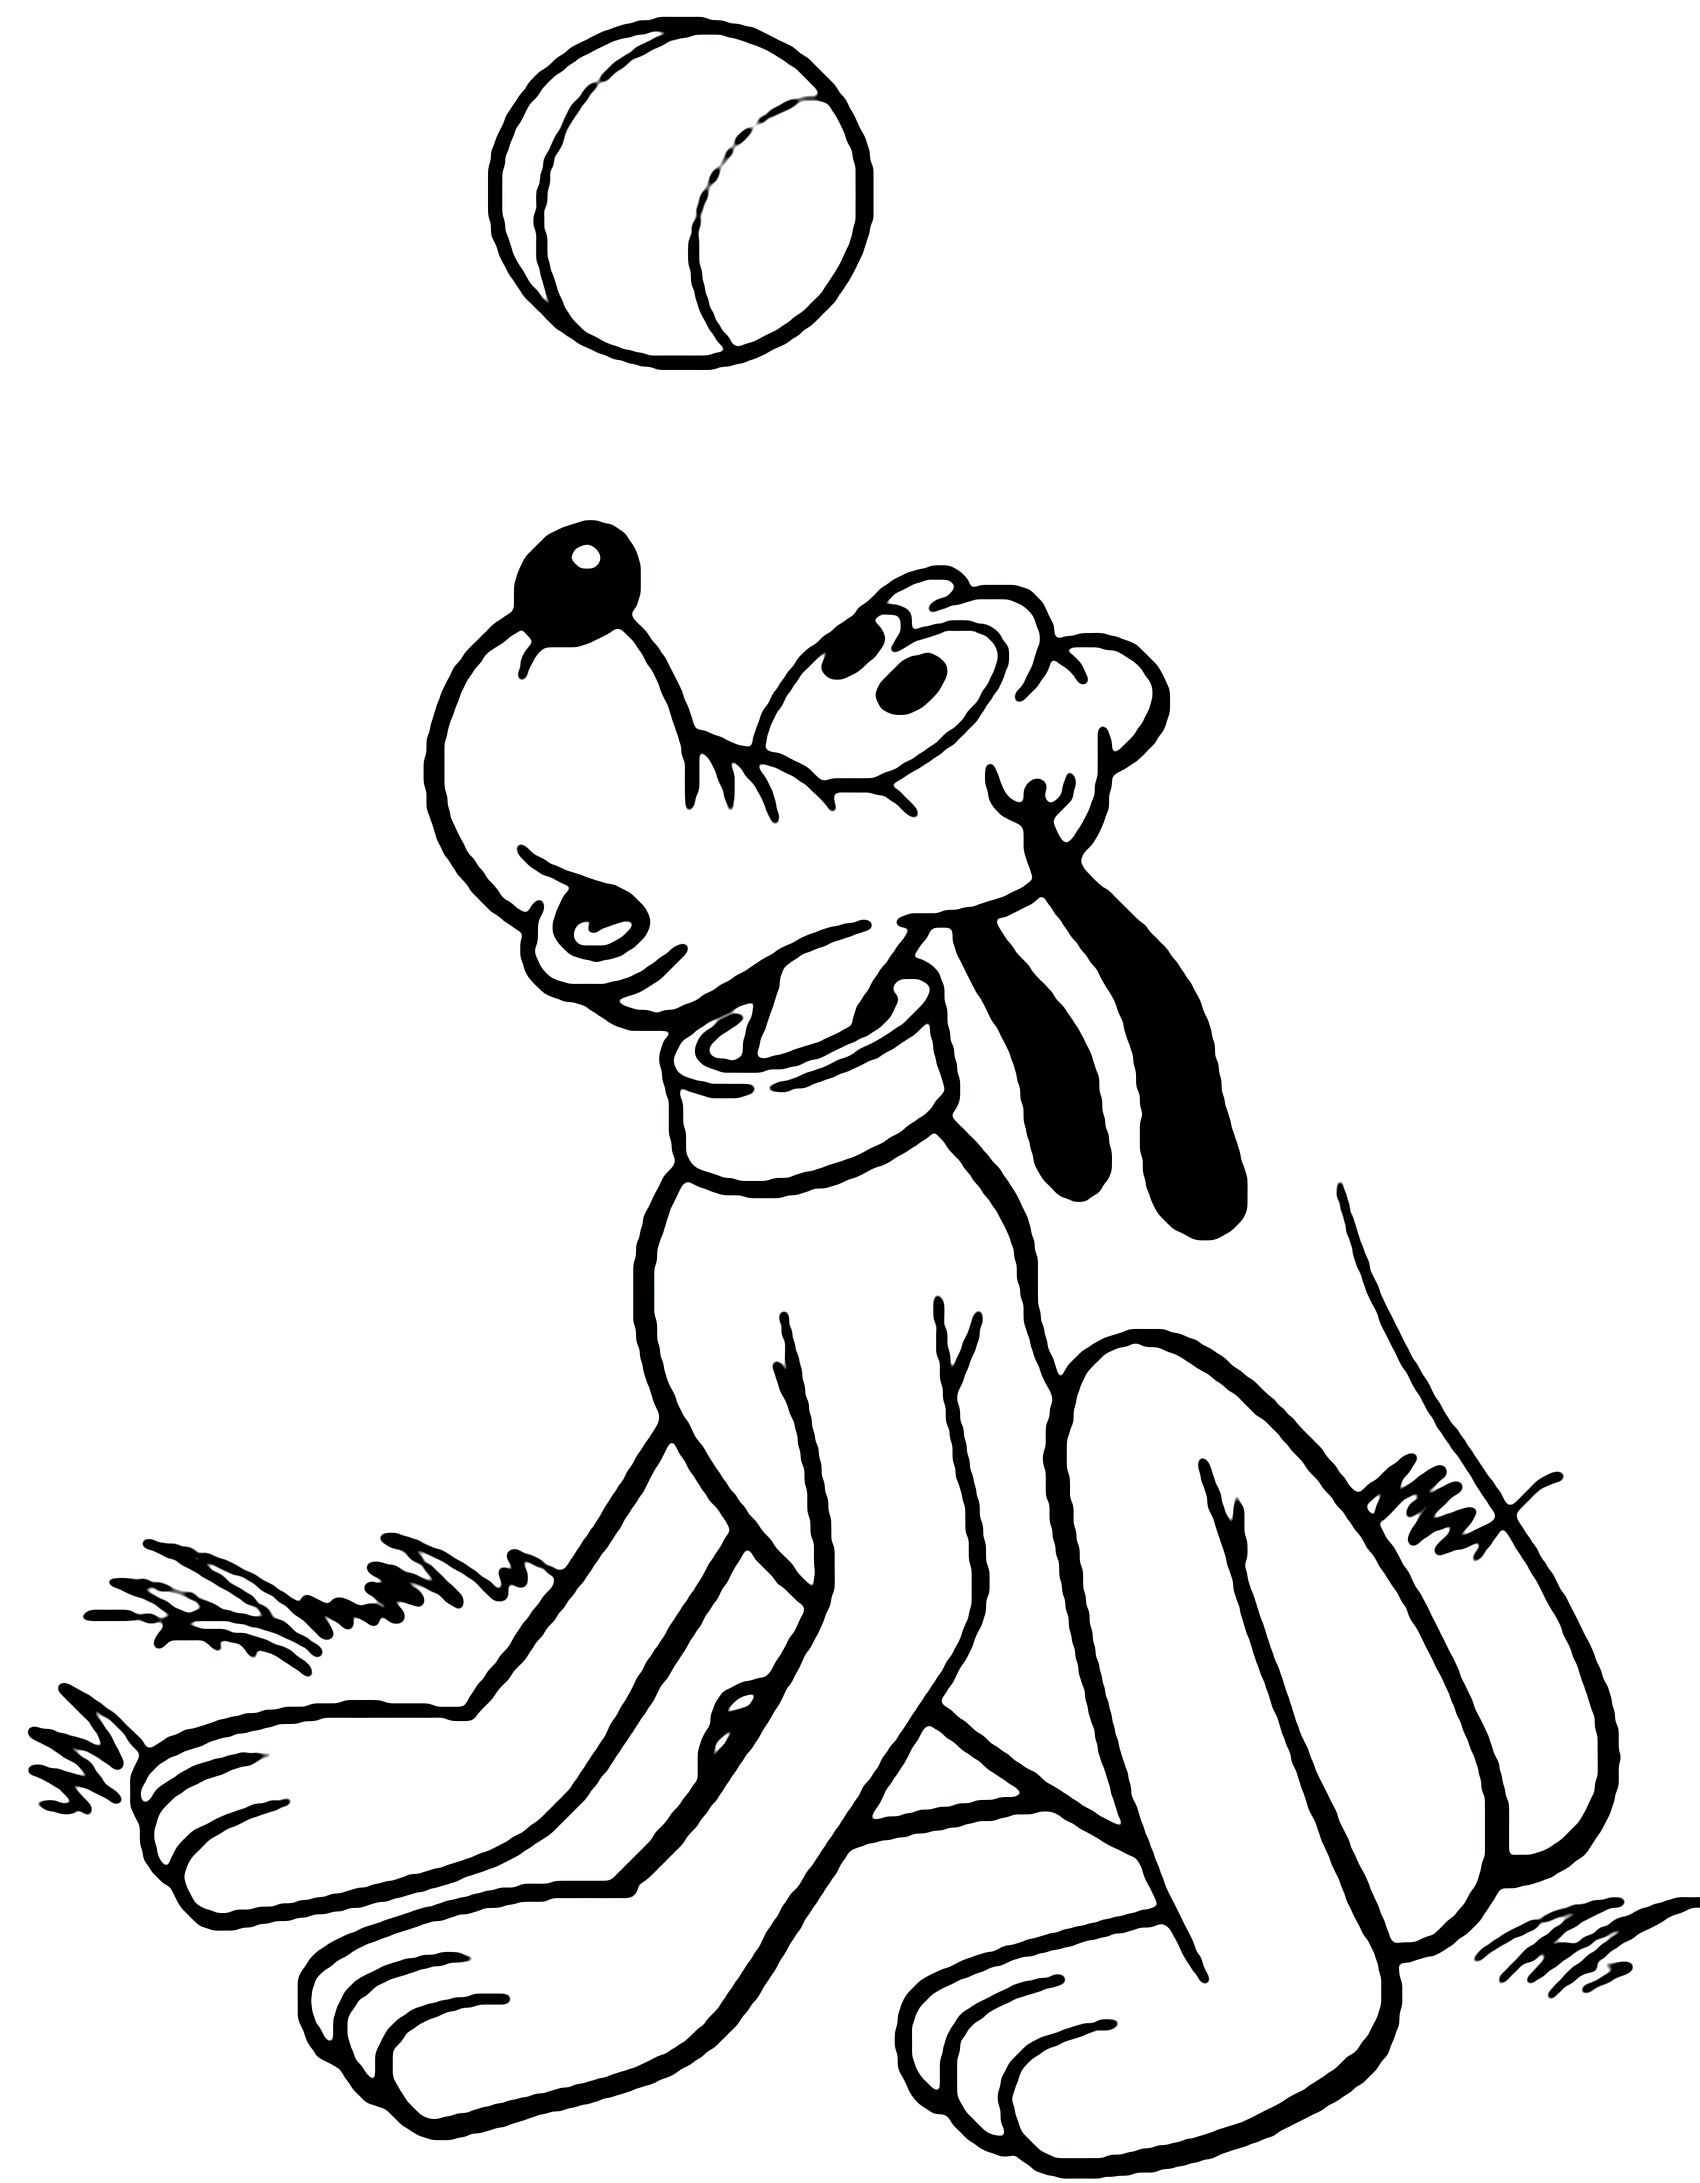 Cute & Easy Pluto Coloring Pages for Toddlers